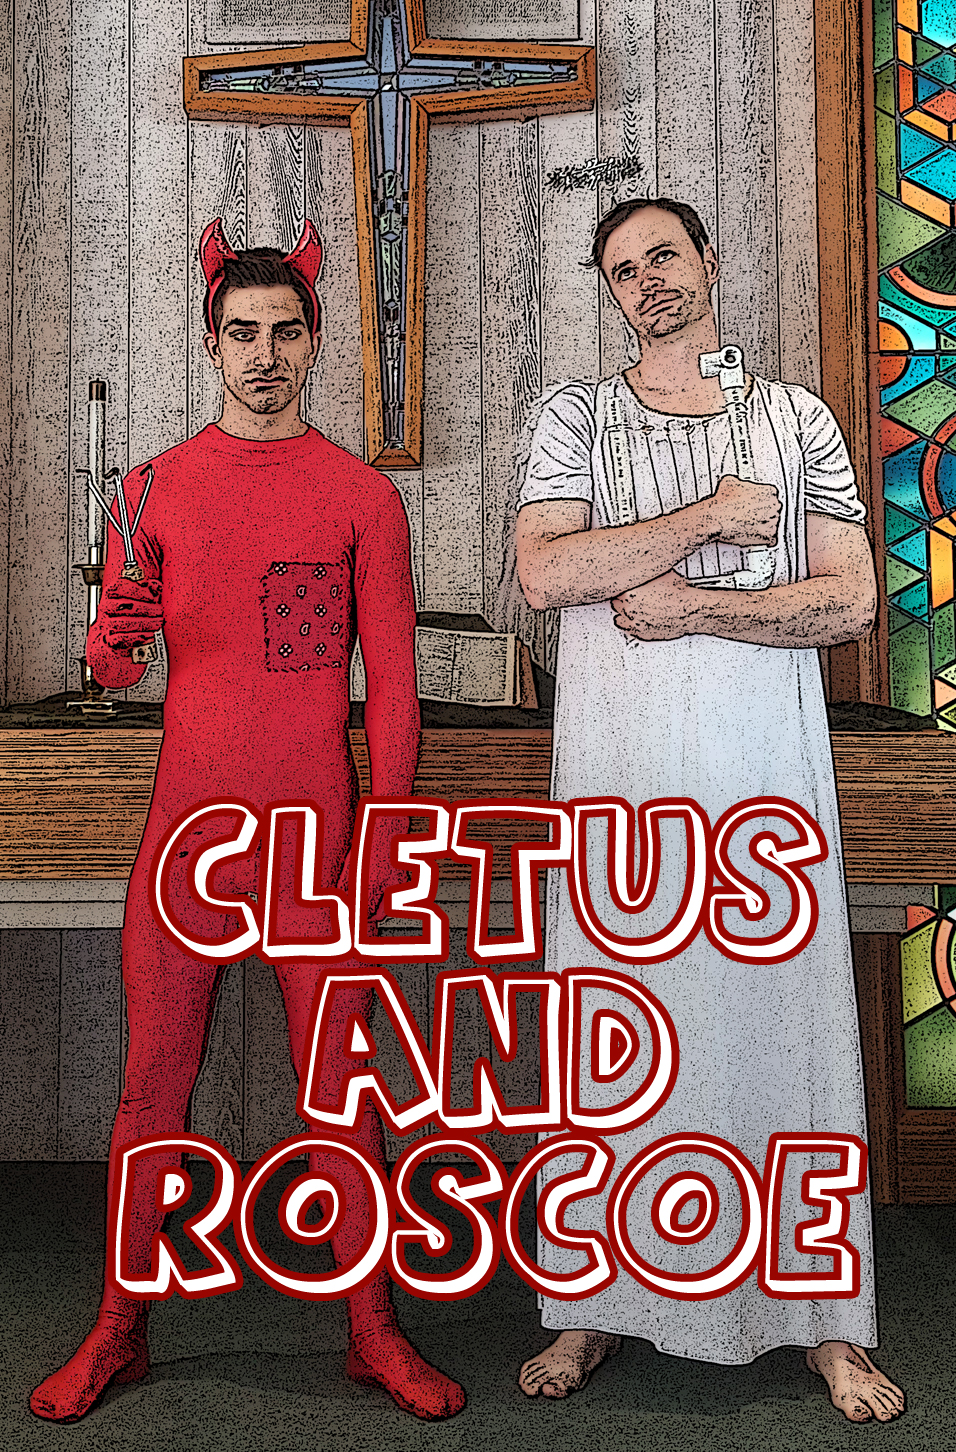 Cletus and Roscoe